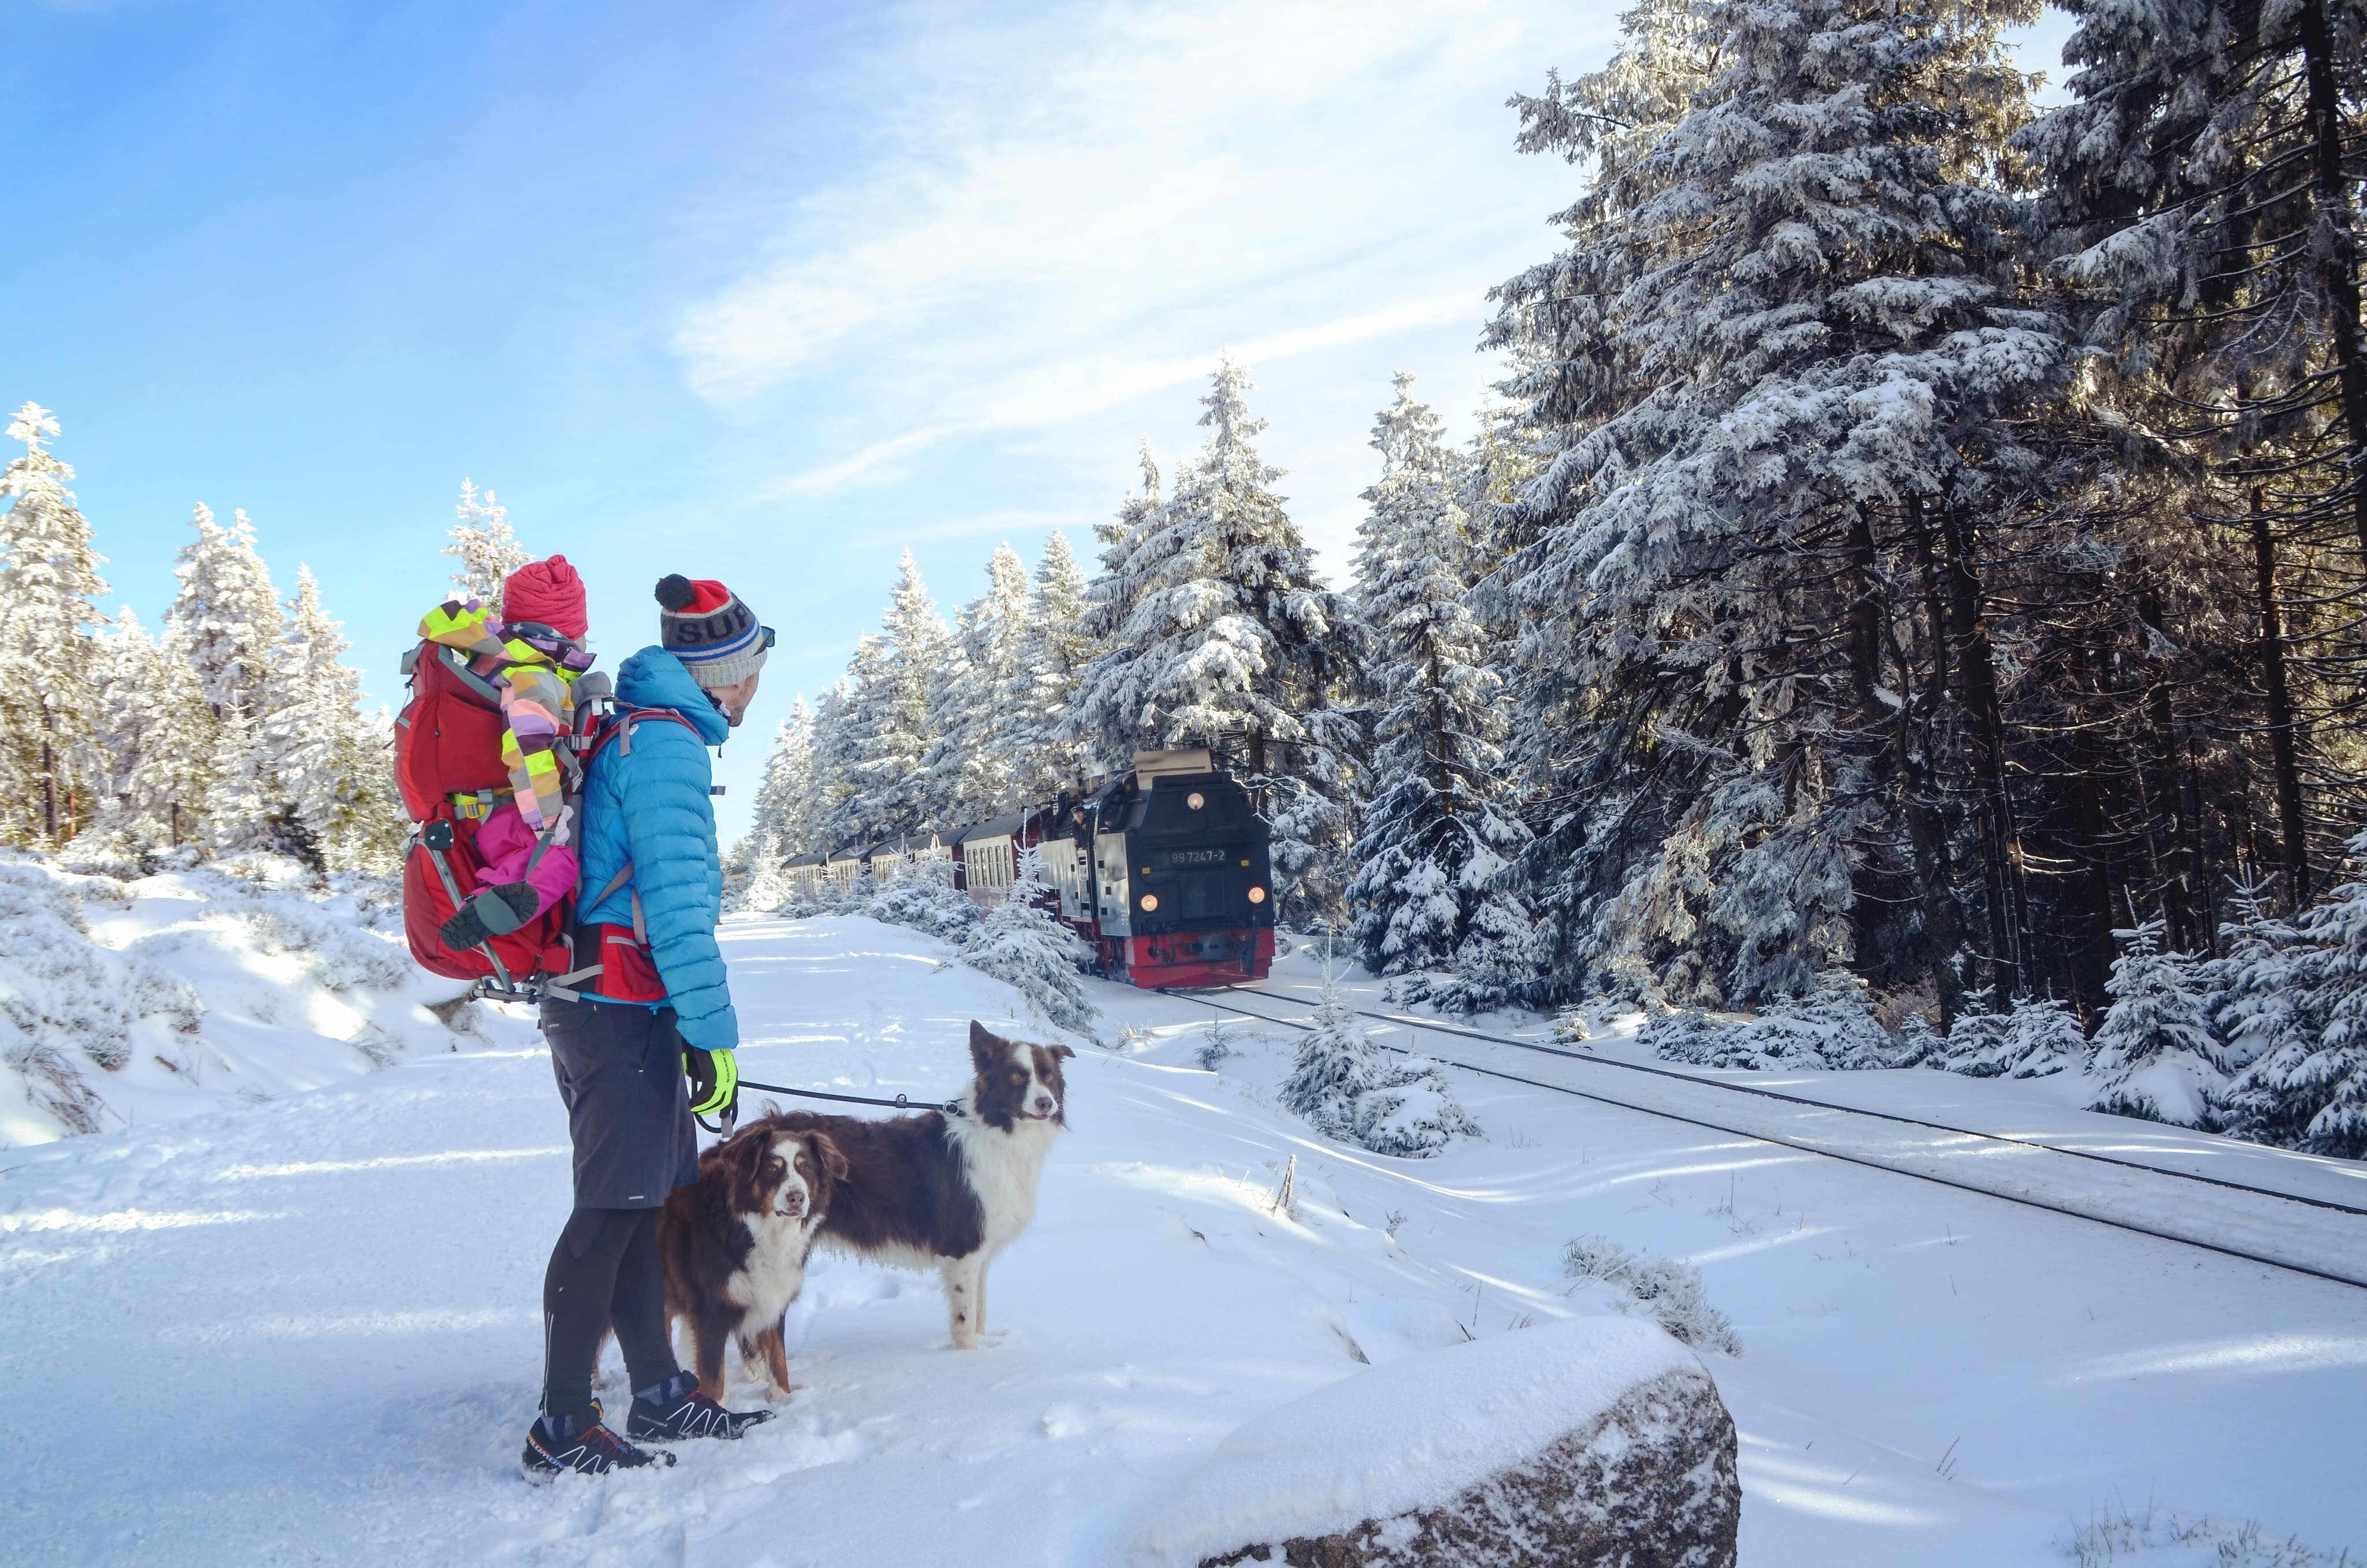 Stock image - Family man child and dog in the snow in Brocken Germany watching a train - Photo by Marcel Martens